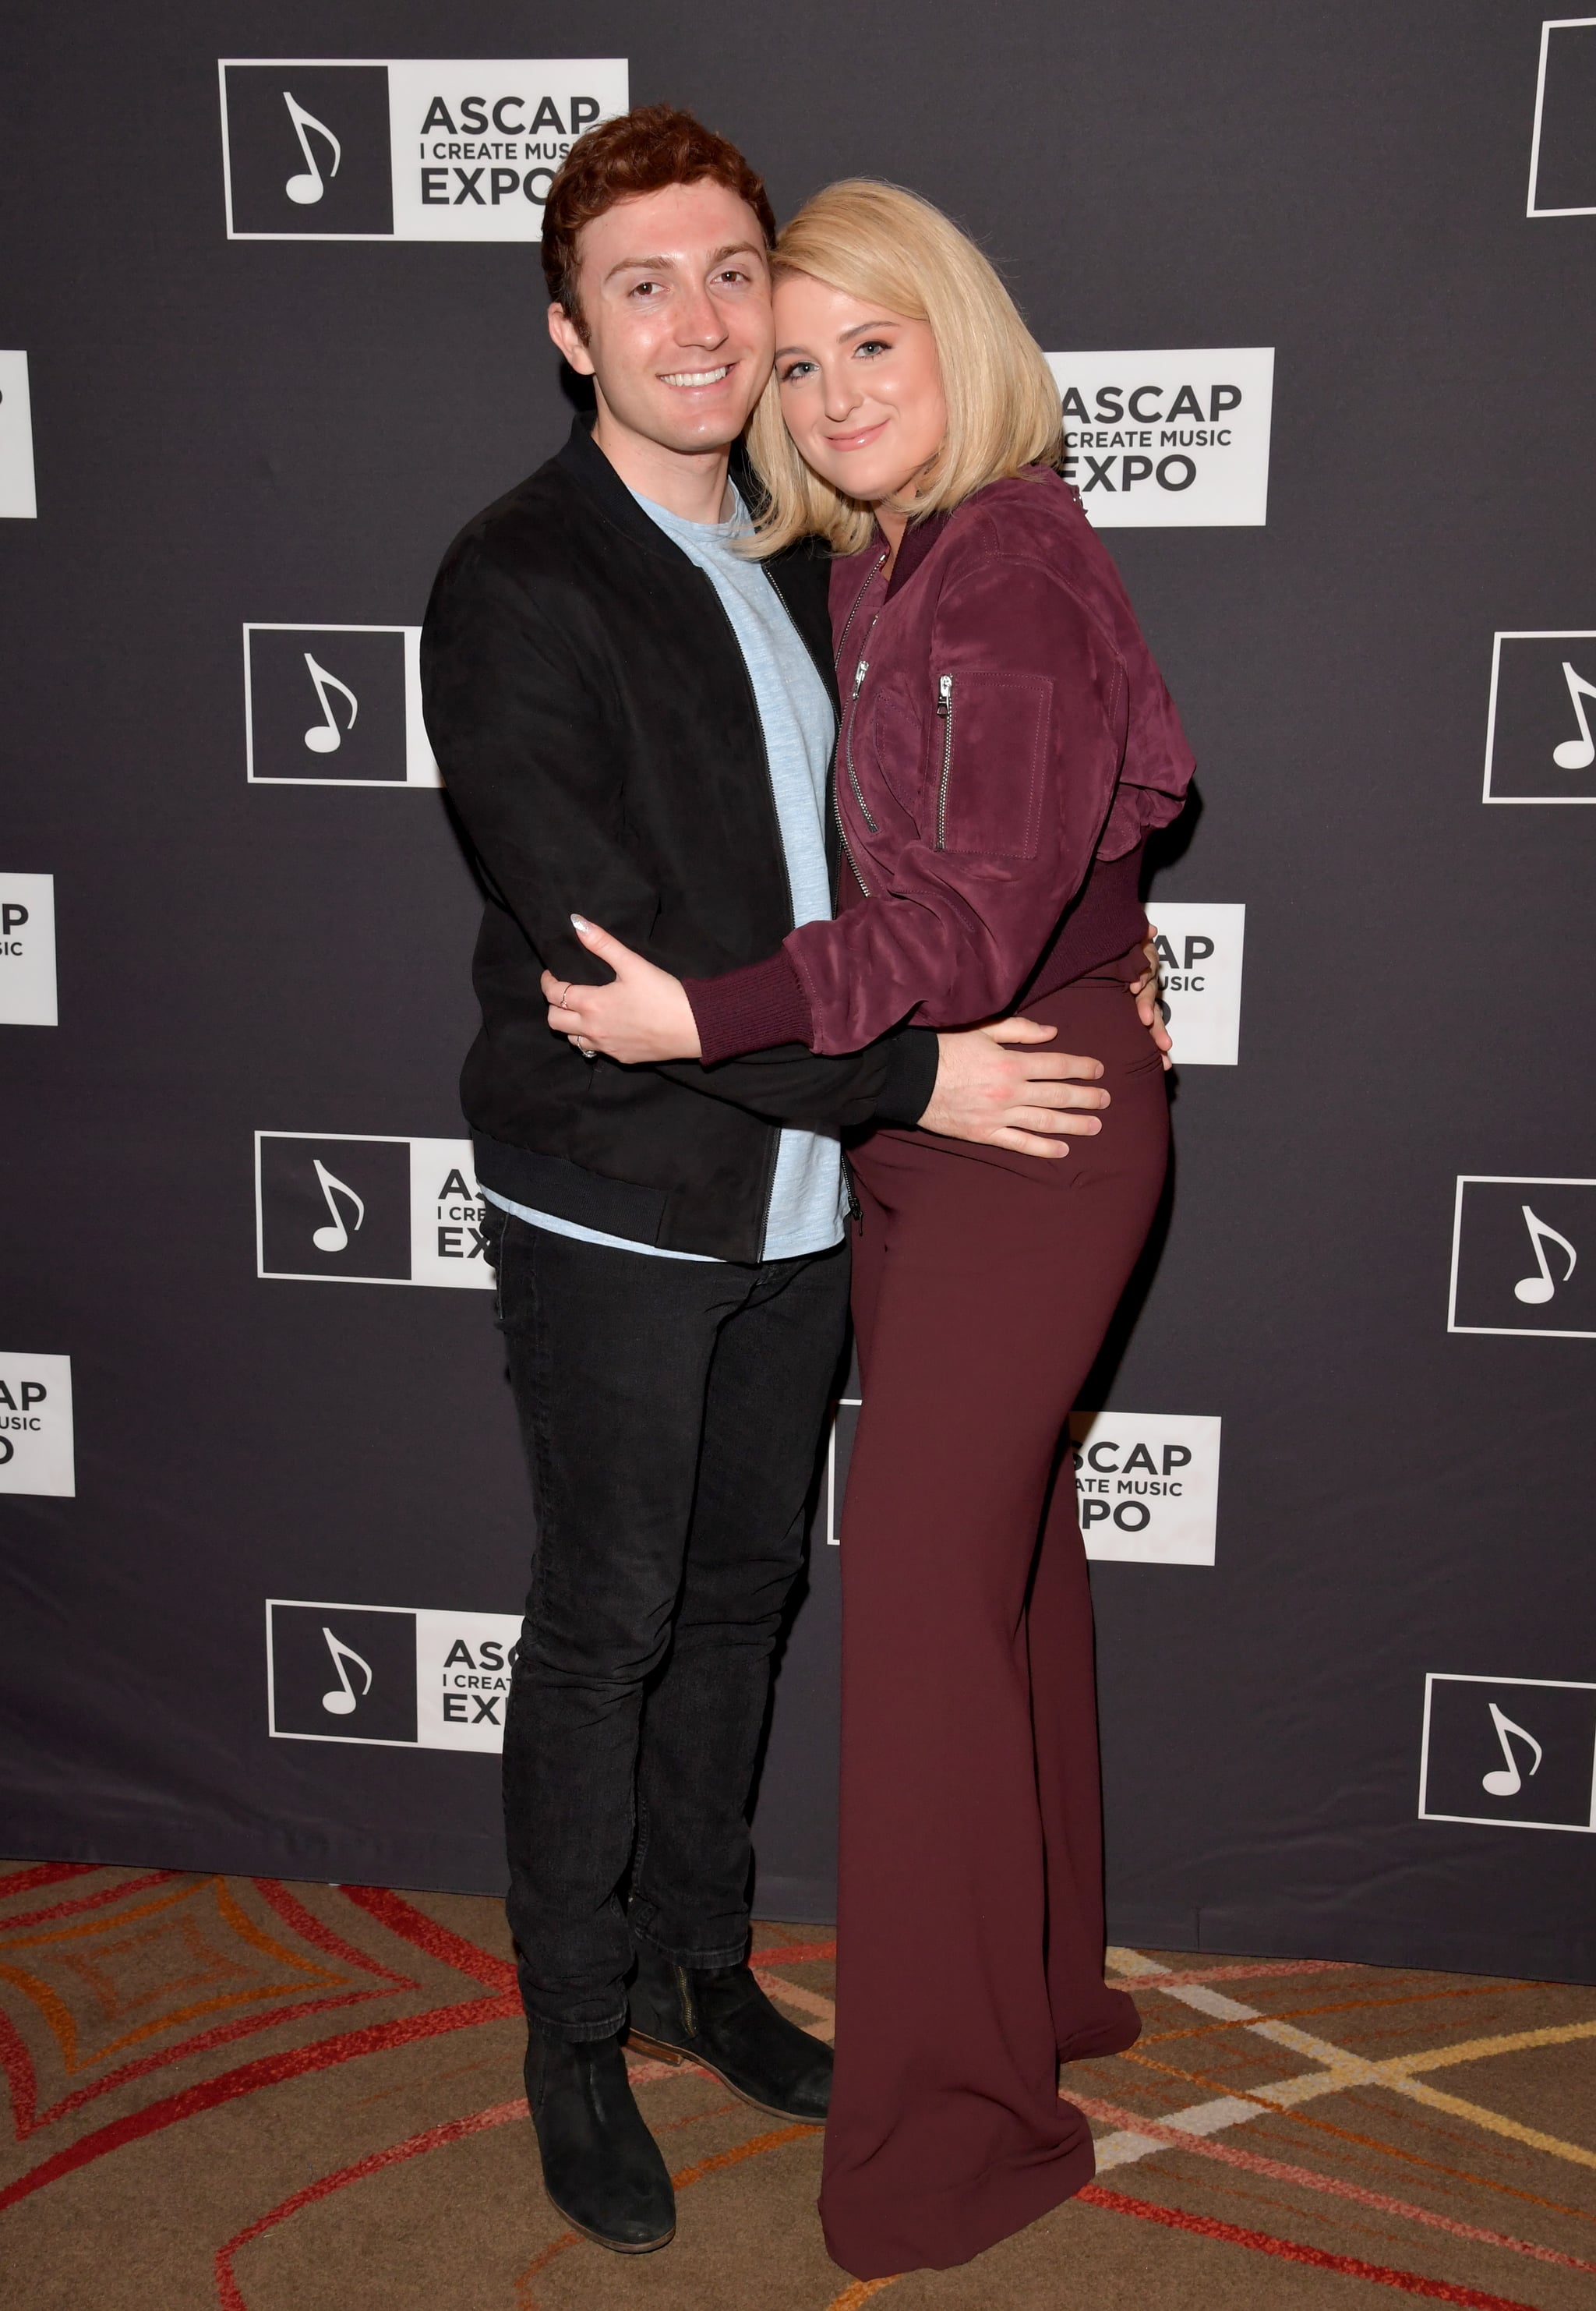 HOLLYWOOD, CA - MAY 09:  (L-R) Daryl Sabara and Meghan Trainor attend the 'Watch Them Do: A Conversation with Meghan Trainor and J Kash' panel during The 2018 ASCAP 